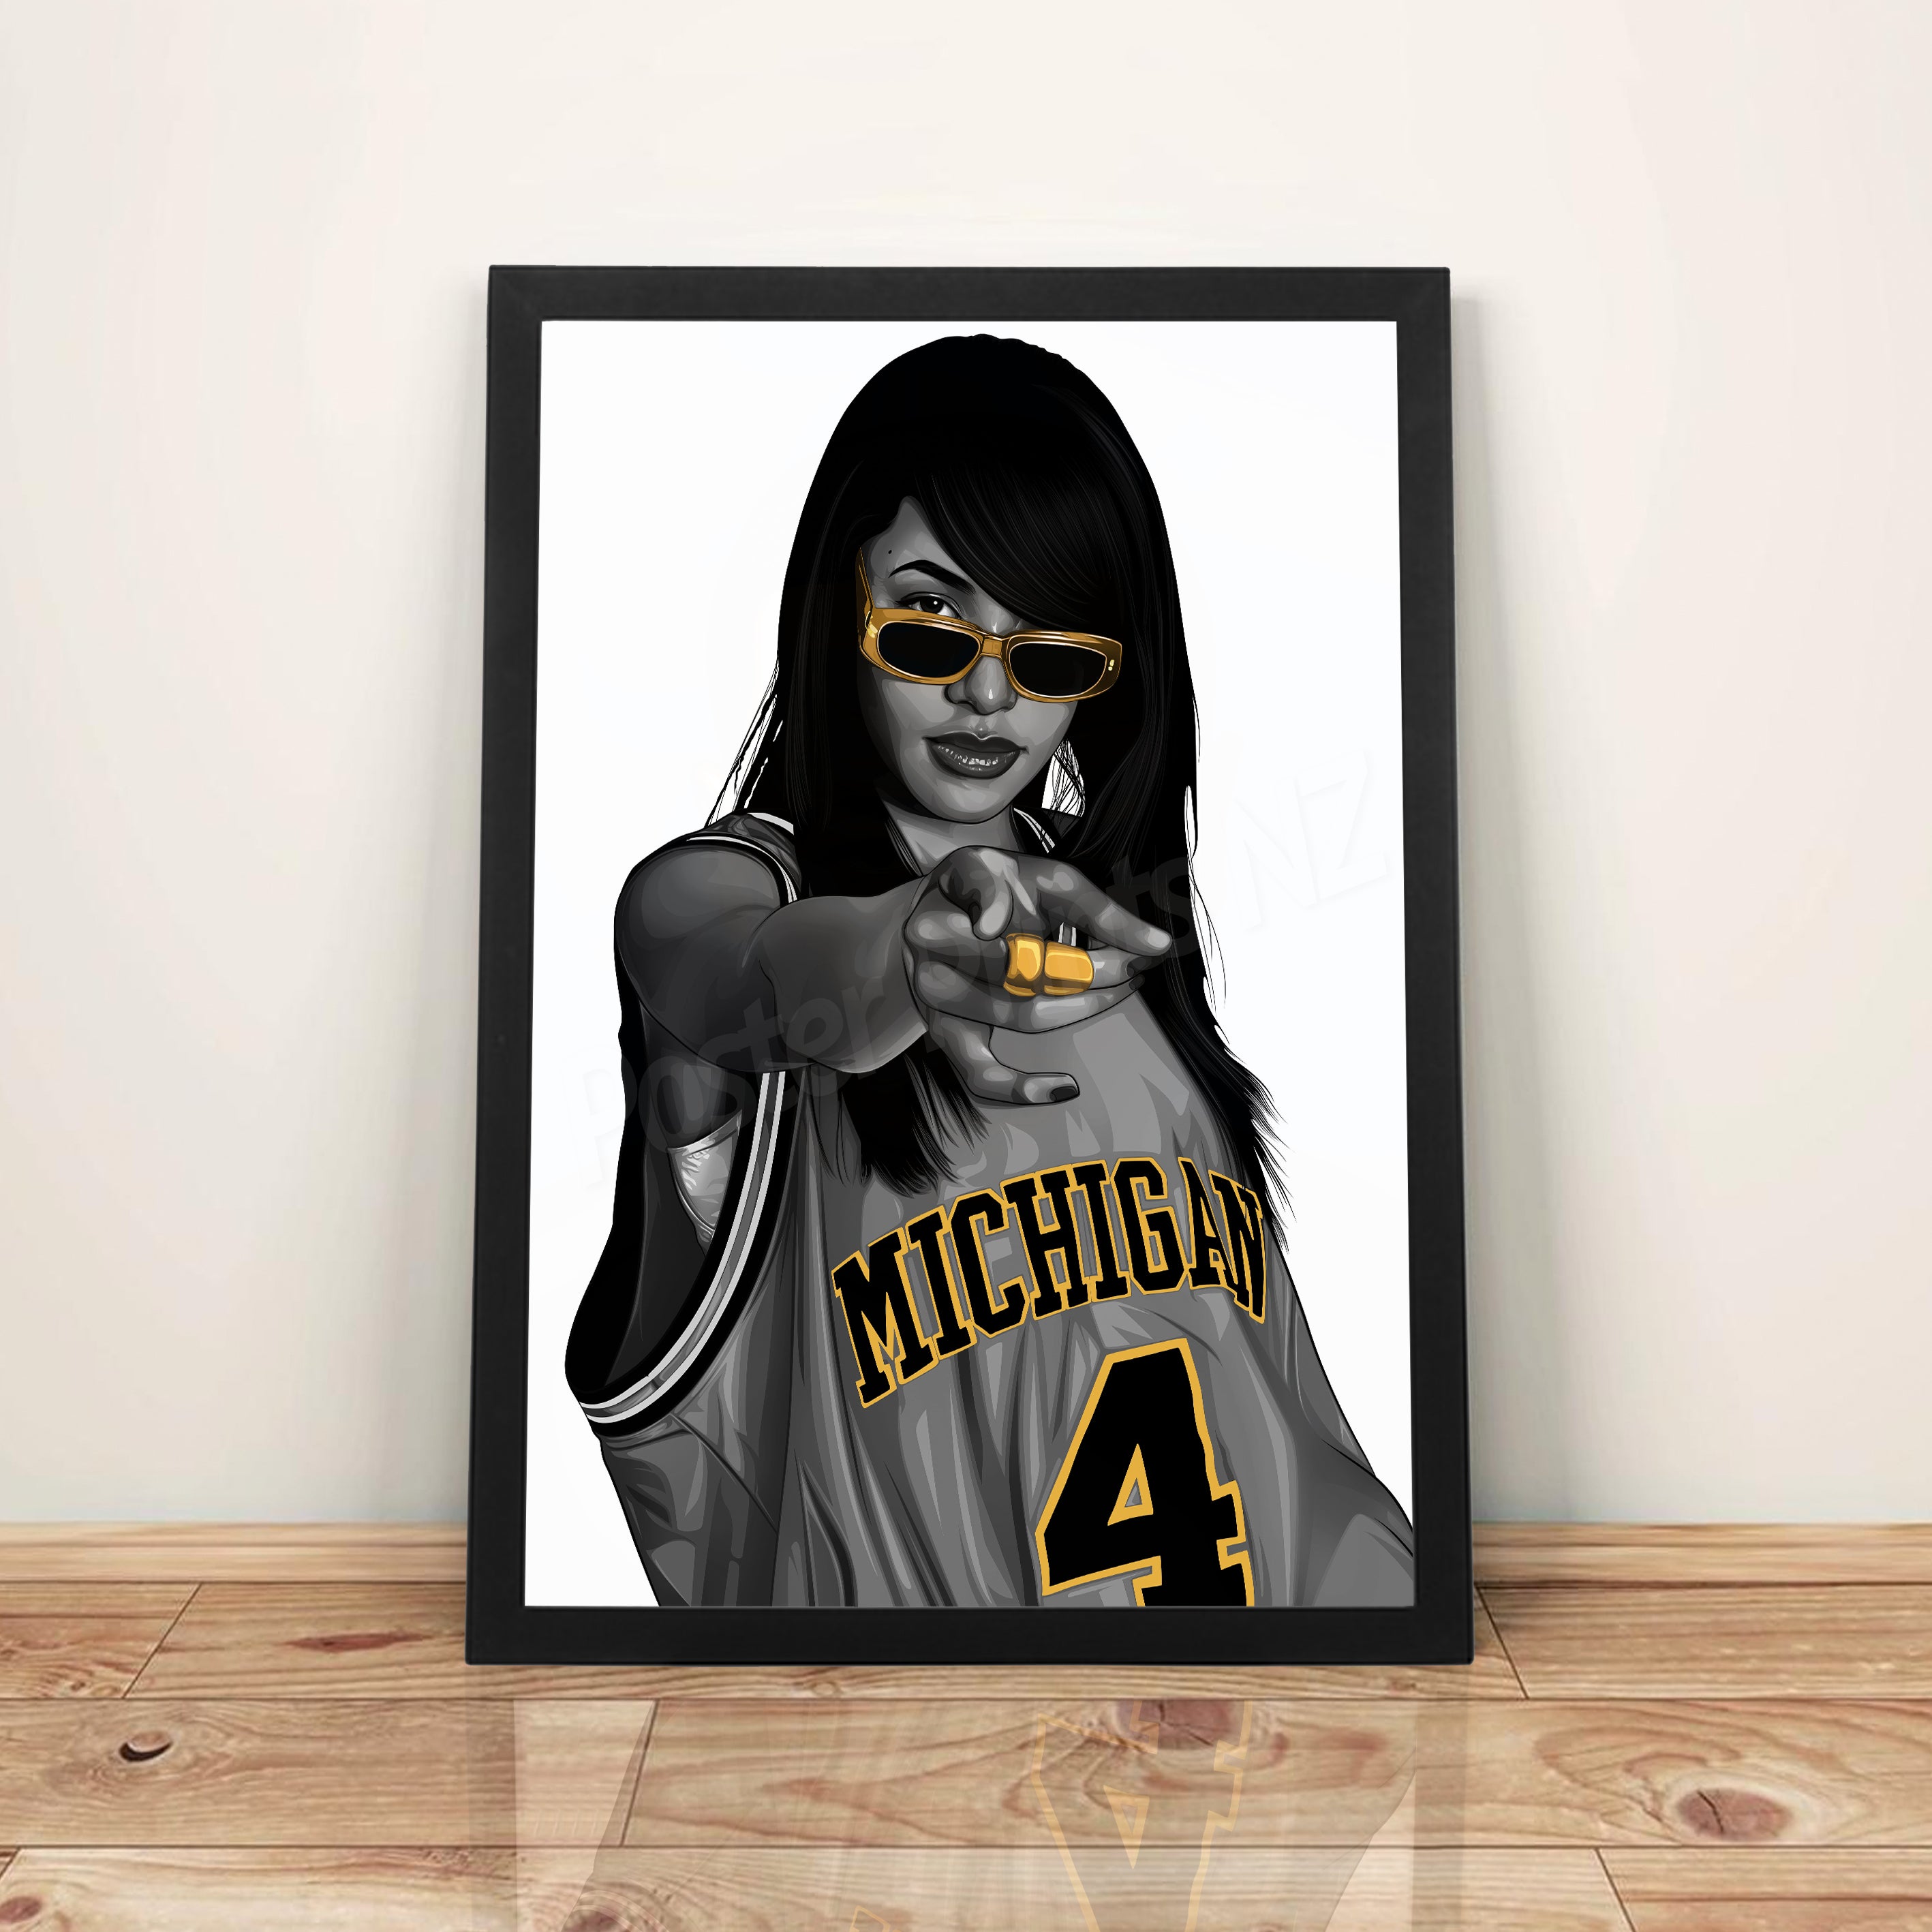 Aaliyah 'Gold Edition' - A3 Framed Art Poster